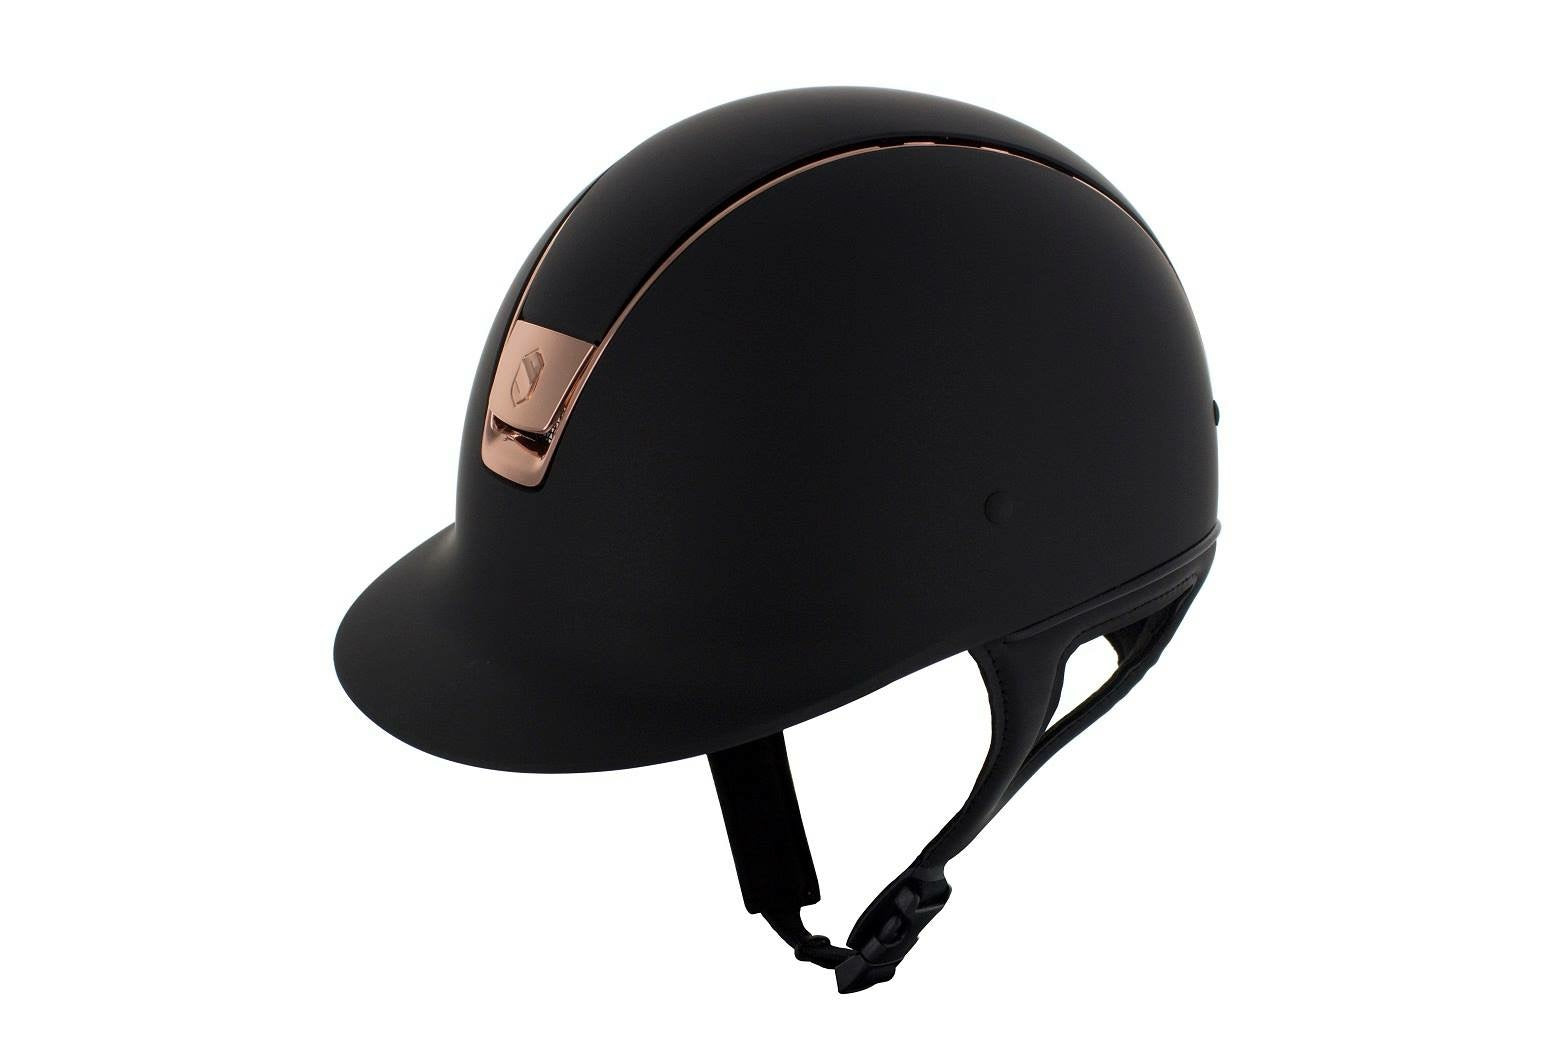 The Samshield Shadowmatt riding hat with rose gold trim.  Available in Black and Navy.